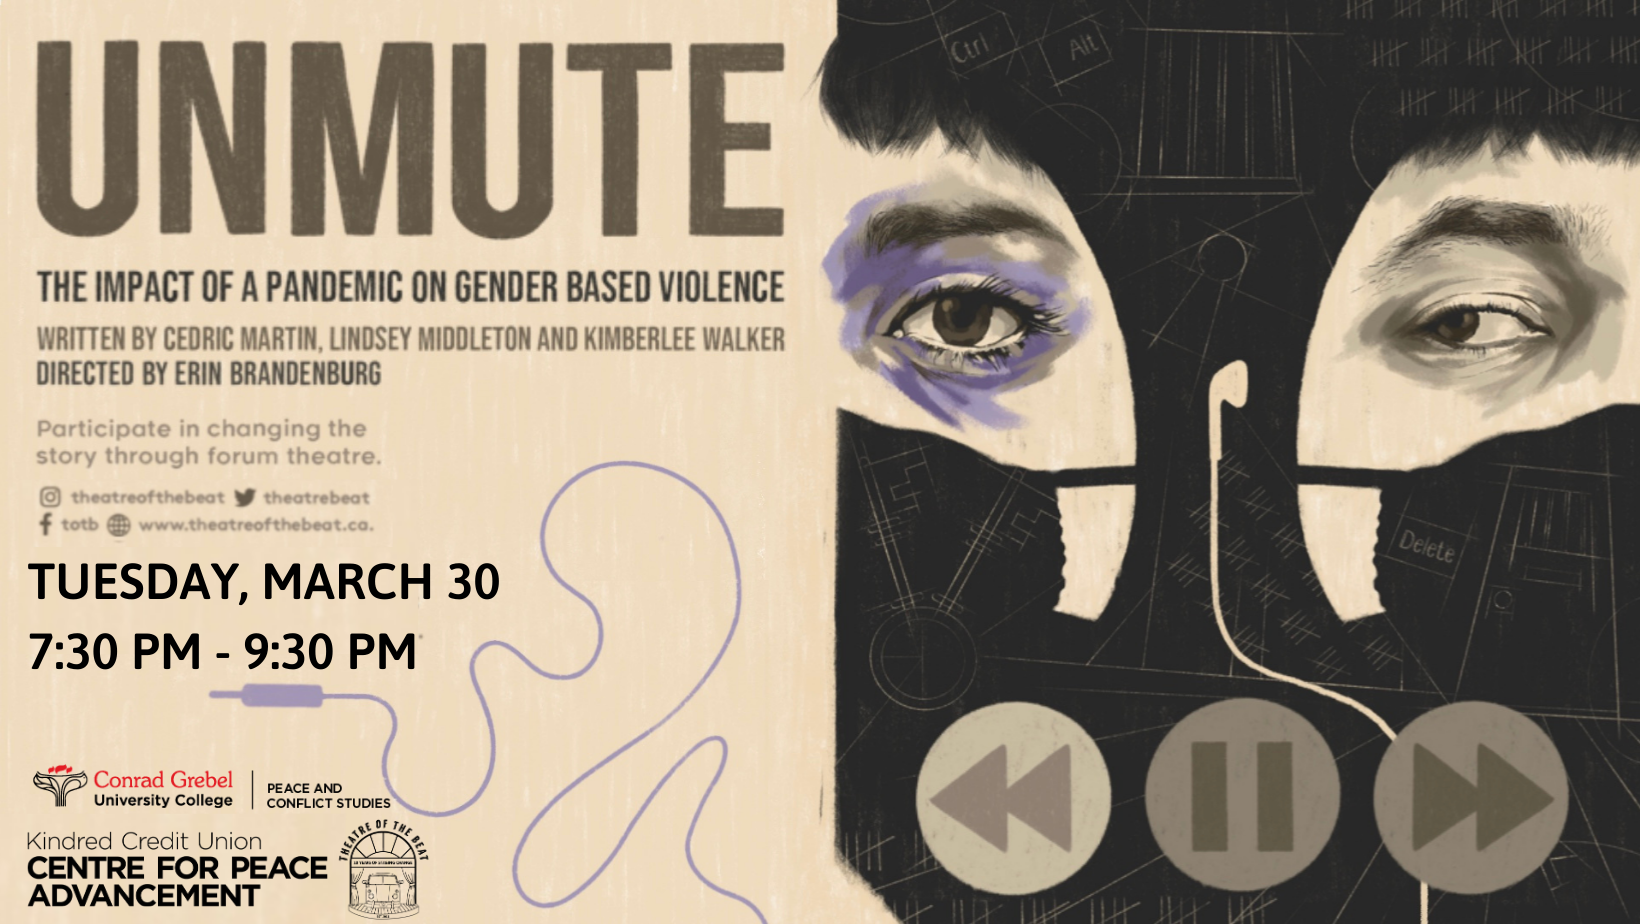 Unmute Poster showing two masked individuals, one with a bruised eye